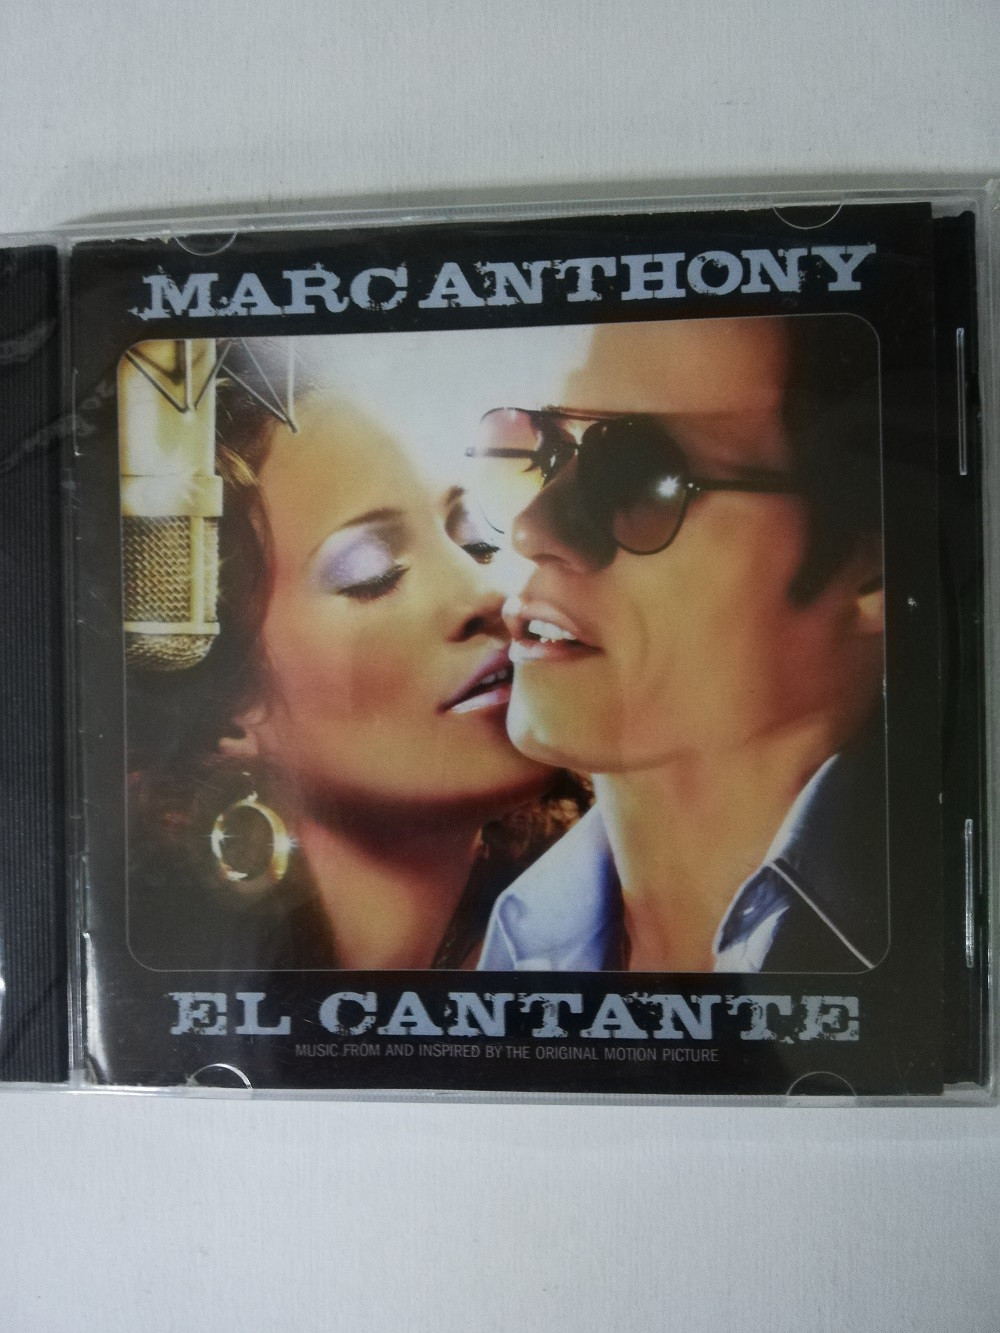 Imagen CD MARC ANTHONY - EL CANTANTE, MUSIC FROM AND INSPIRATED BY THE ORIGINAL MOTION PICTURE 1